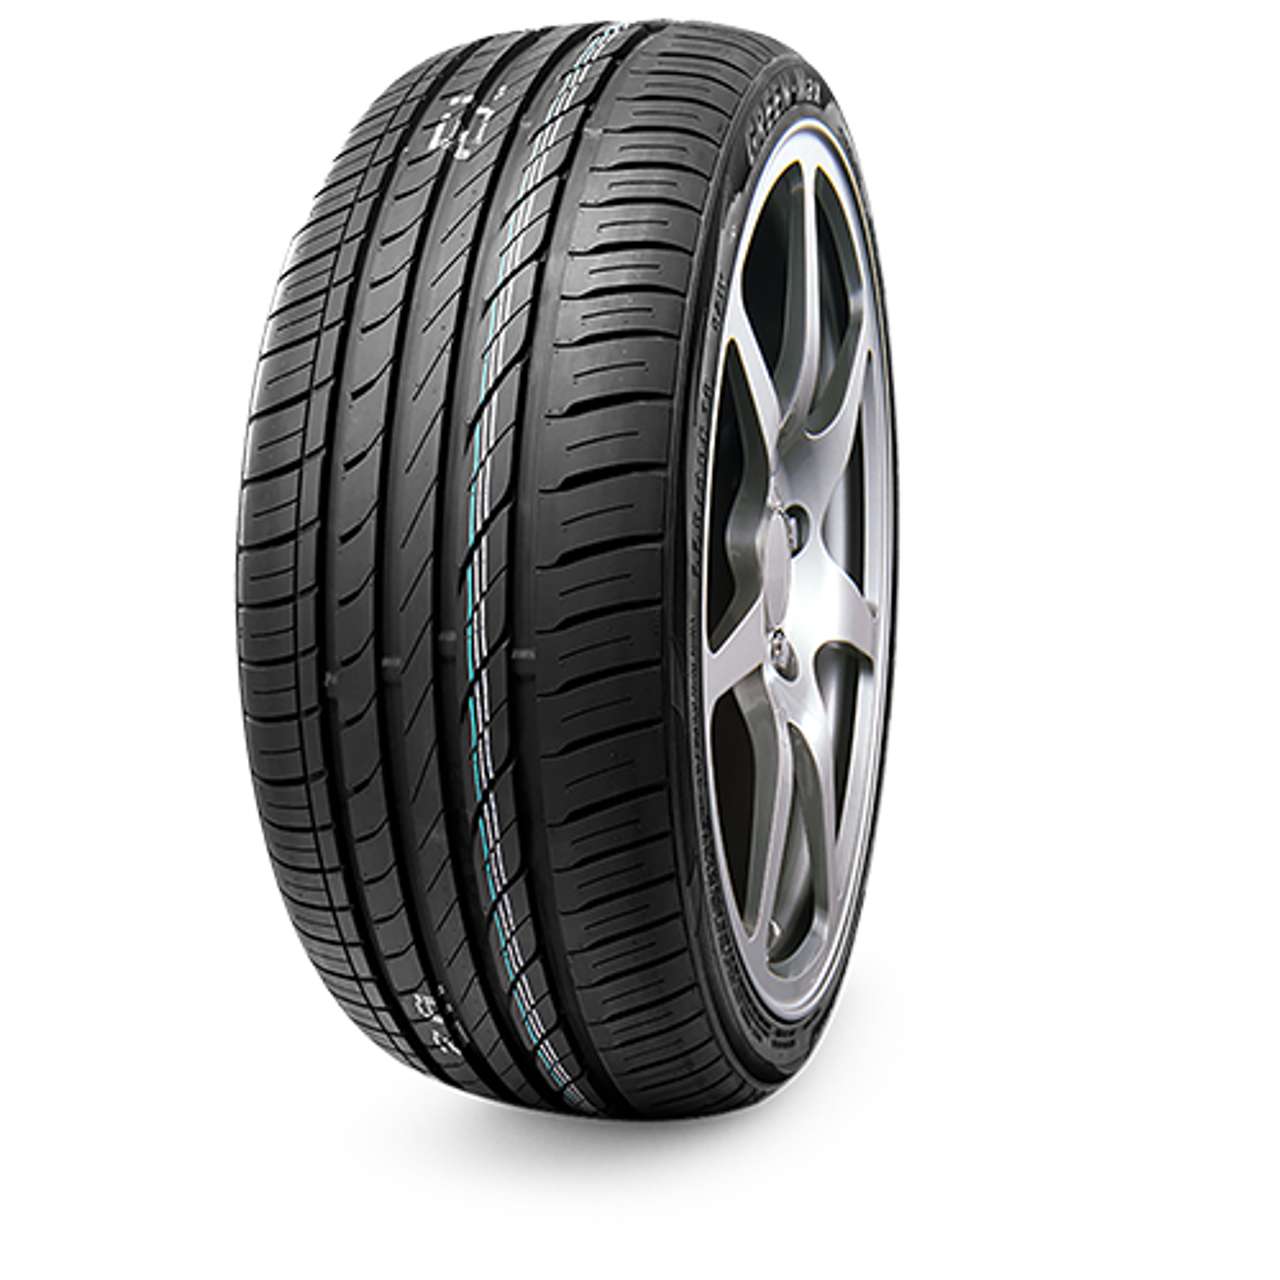 LINGLONG GREEN-MAX 235/45R18 98Y MFS BSW